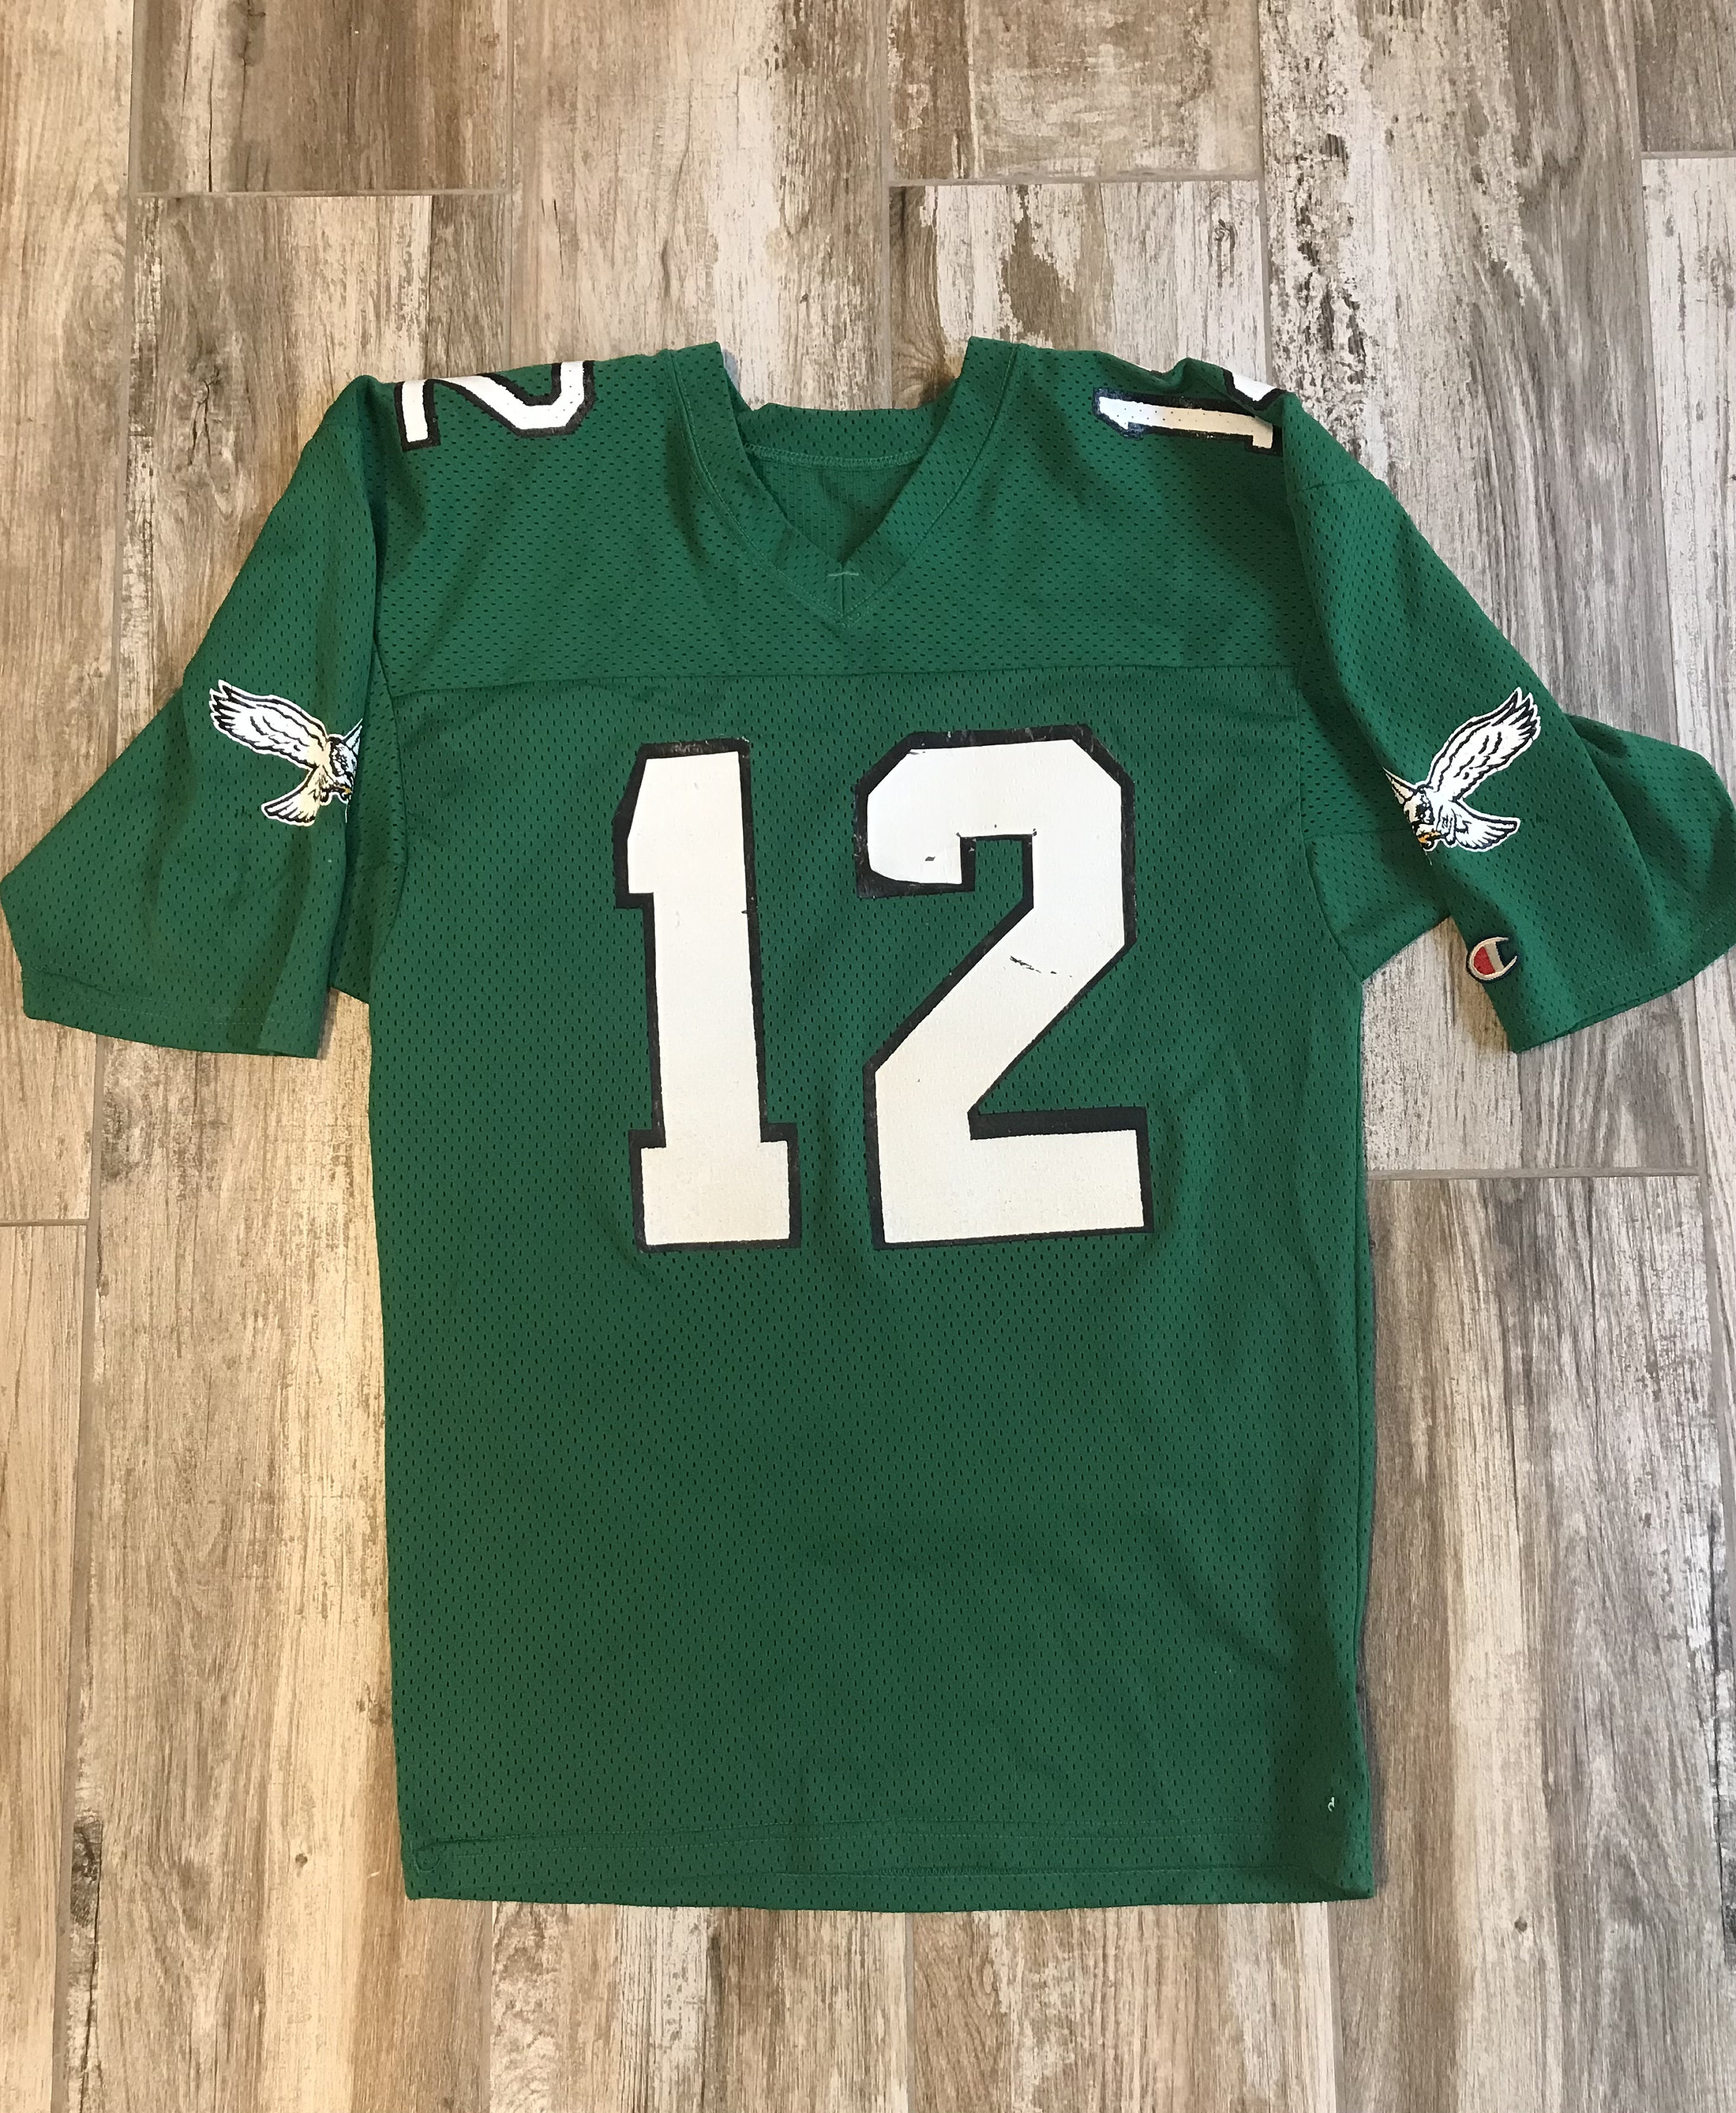 12 eagles jersey